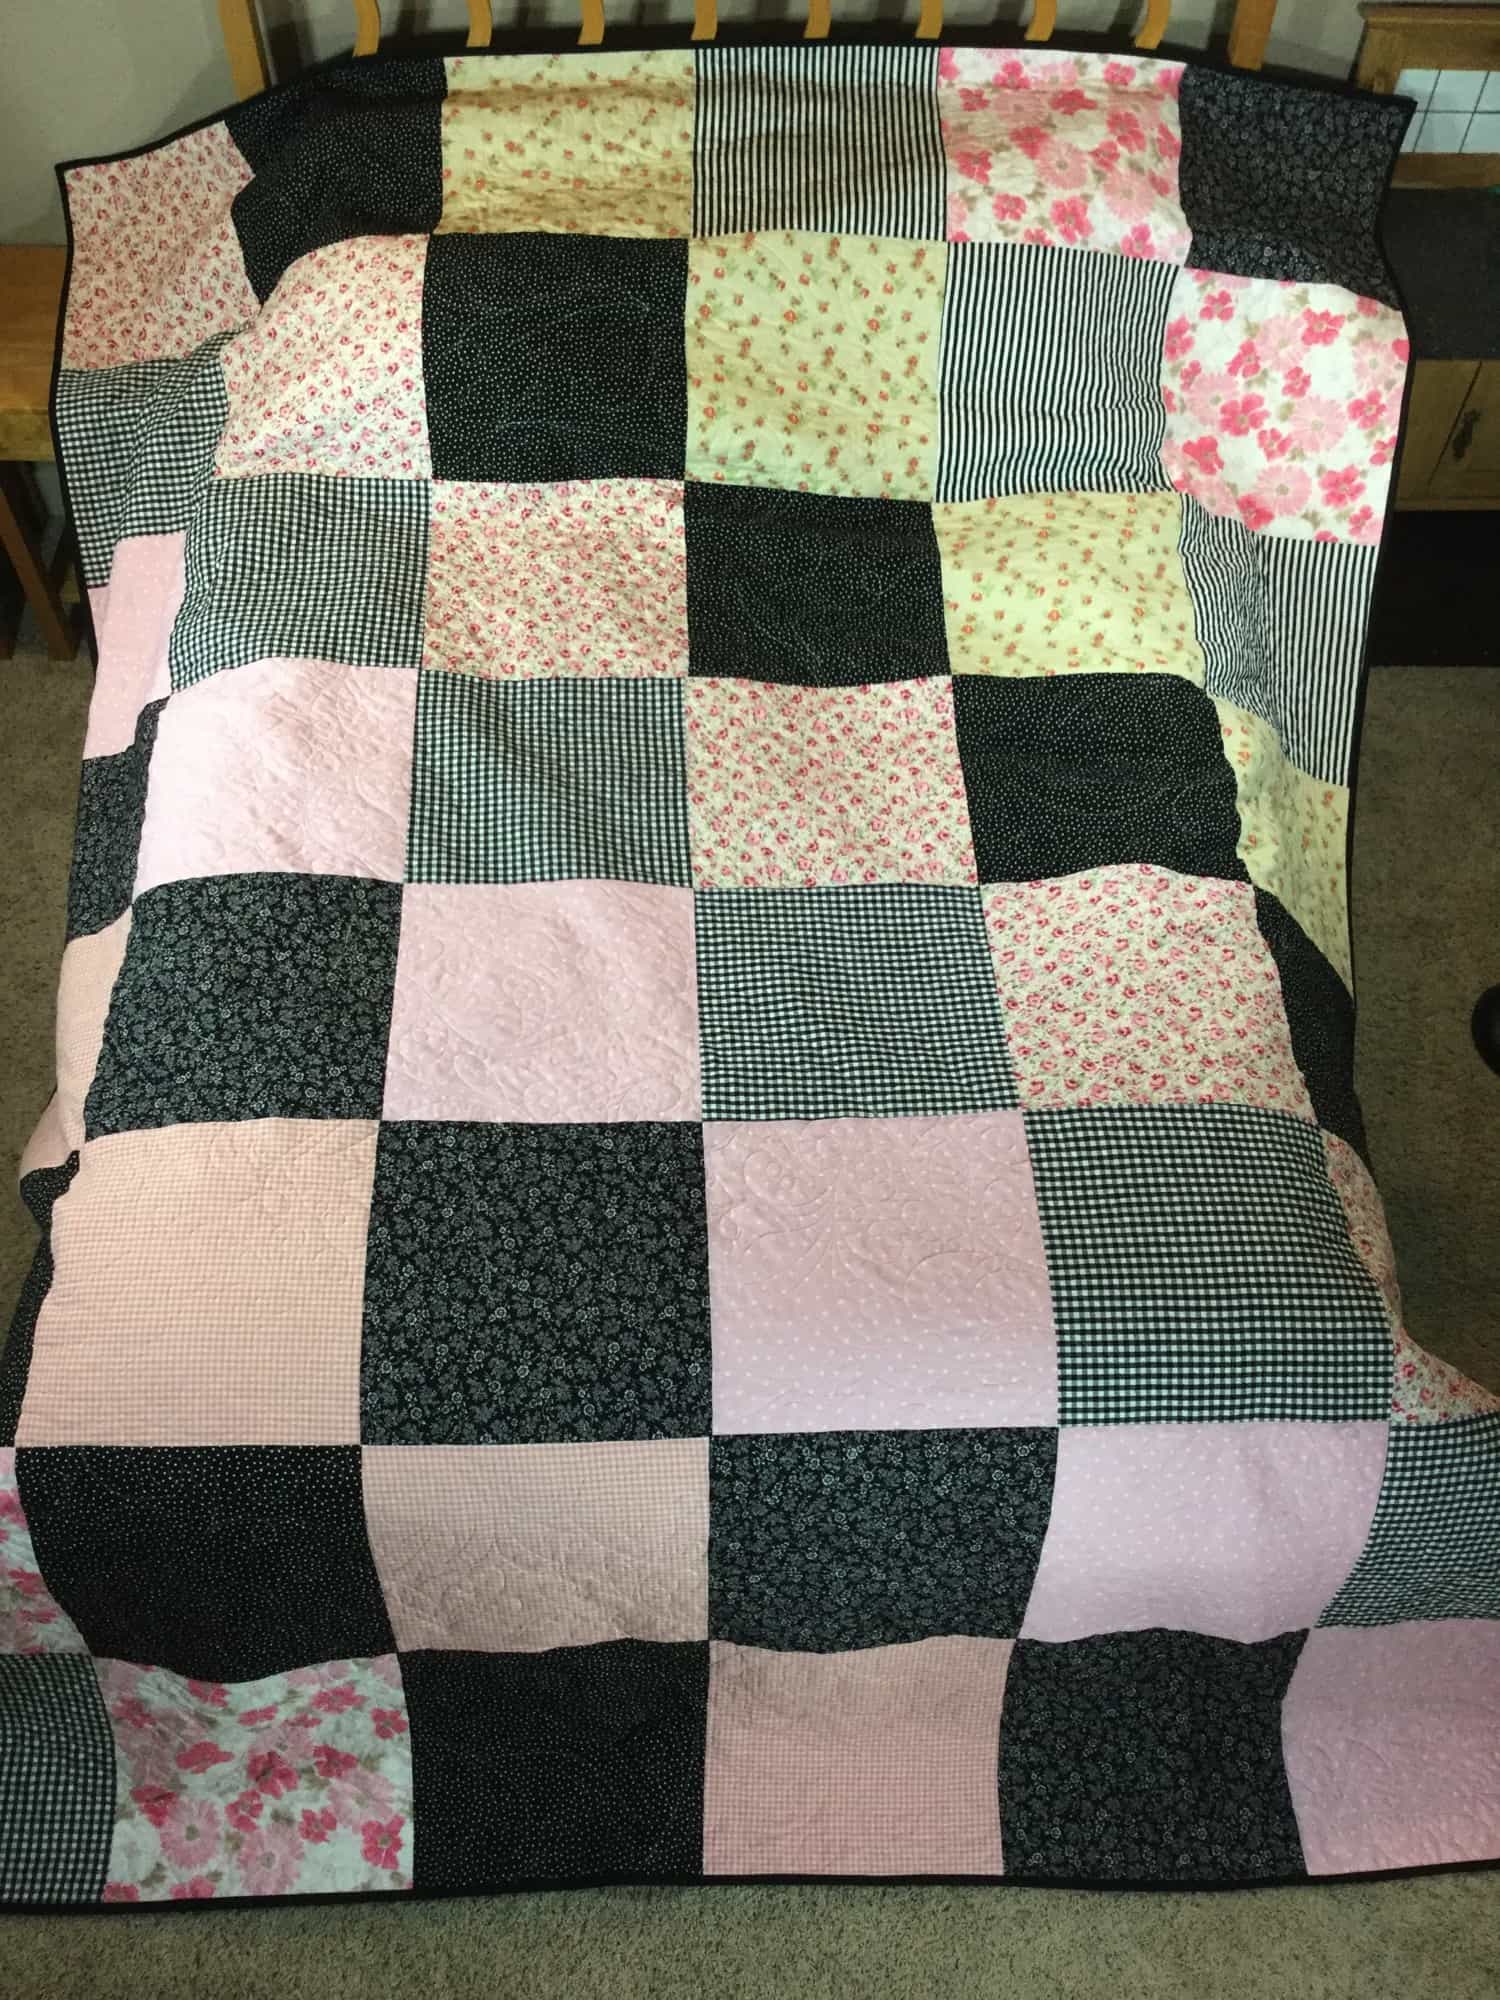 Image of an weddings memory quilt that I completed for a customer